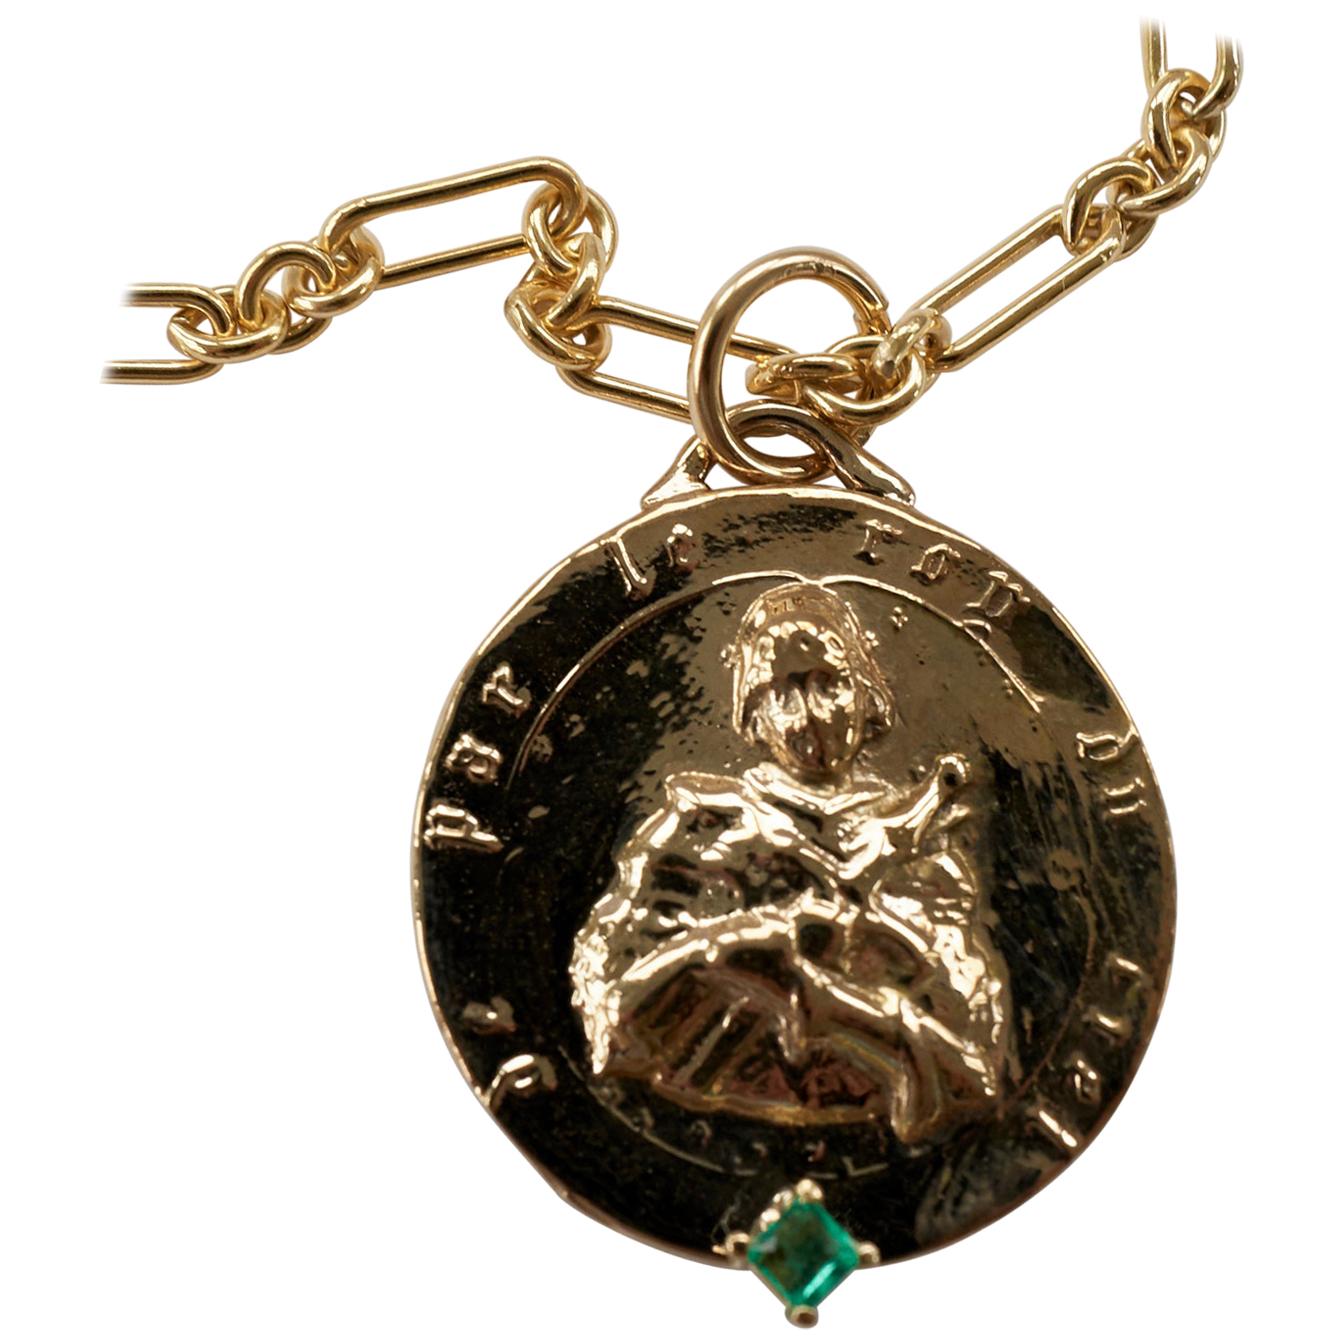 Emerald Medal Long Chunky Chain Necklace Saint Joan of Arc J Dauphin

Exclusive piece with Joan of Arc Medal Round Coin pendant in Bronze with a square Emerald  set in Gold prong and a gold filled Chain. Necklace is 22